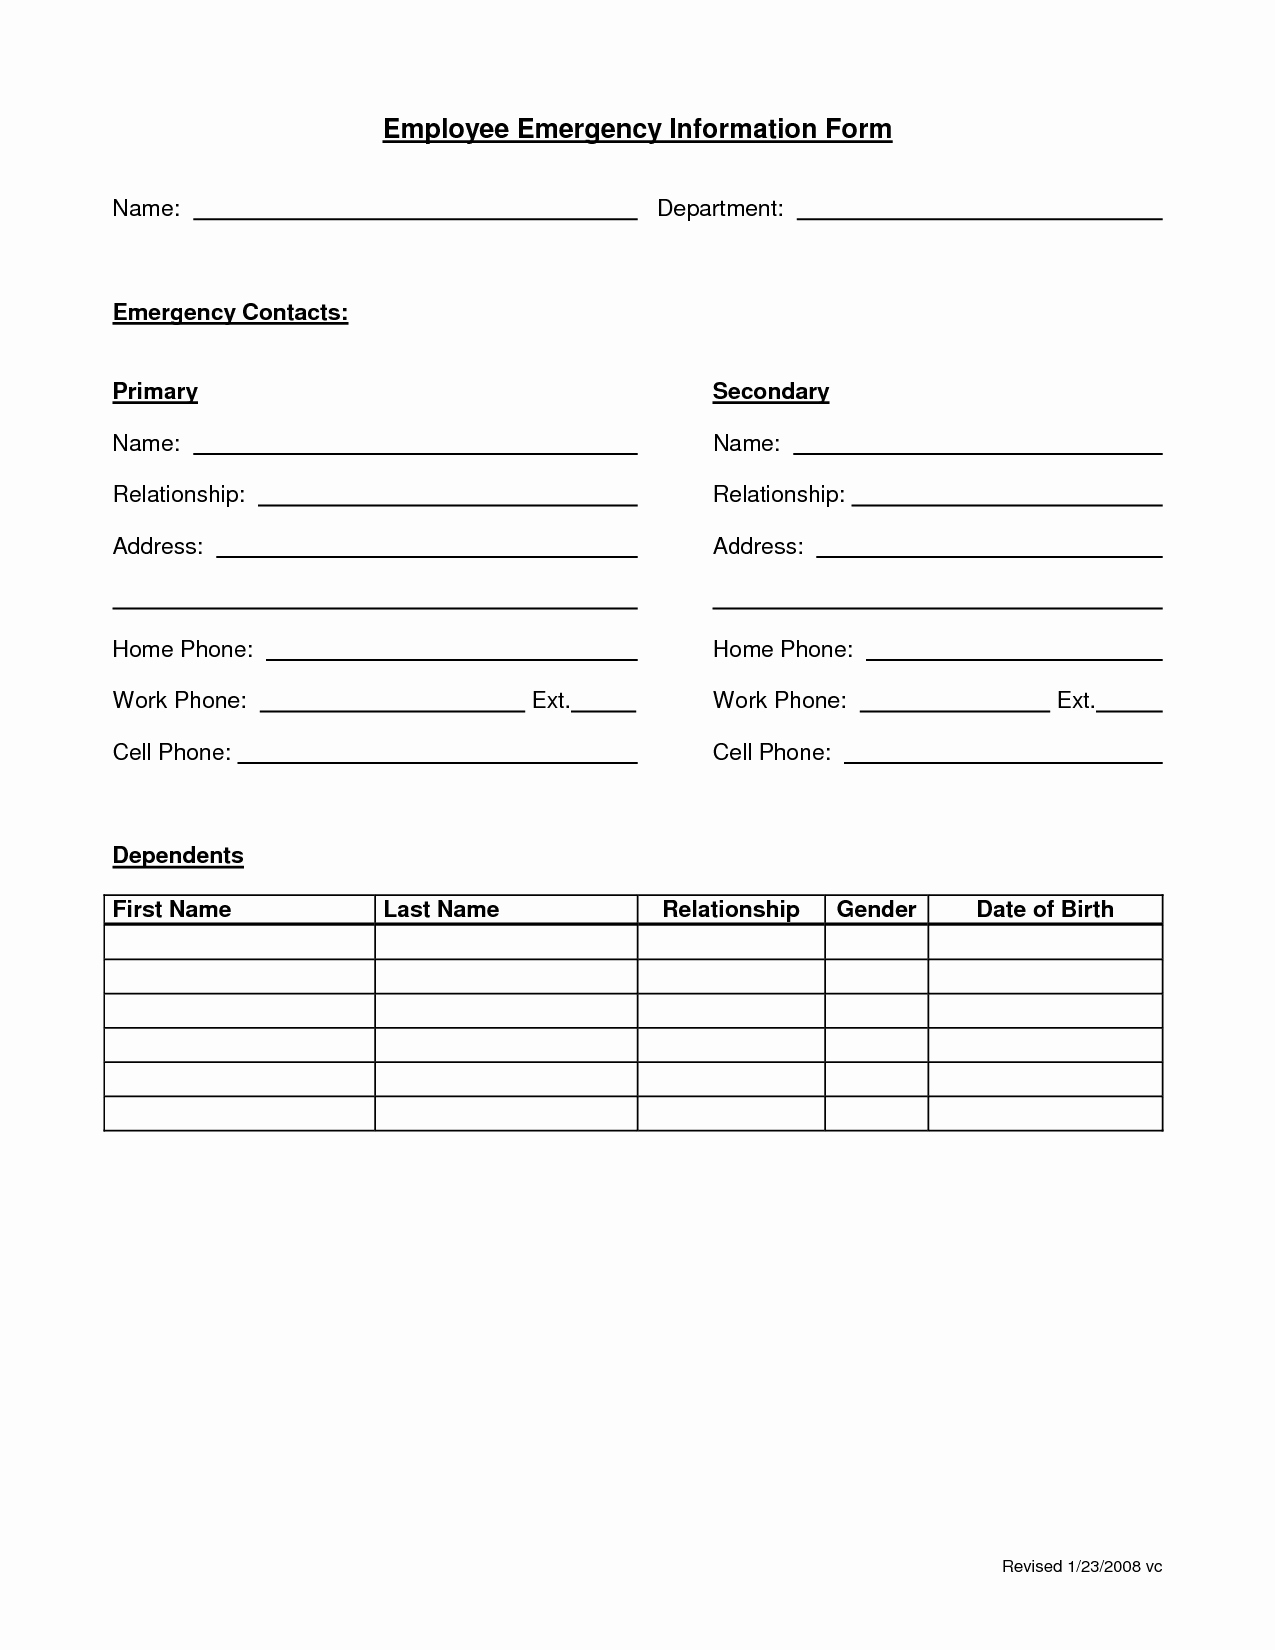 Employee Emergency Contact form Word Awesome Employee Emergency form Employee forms